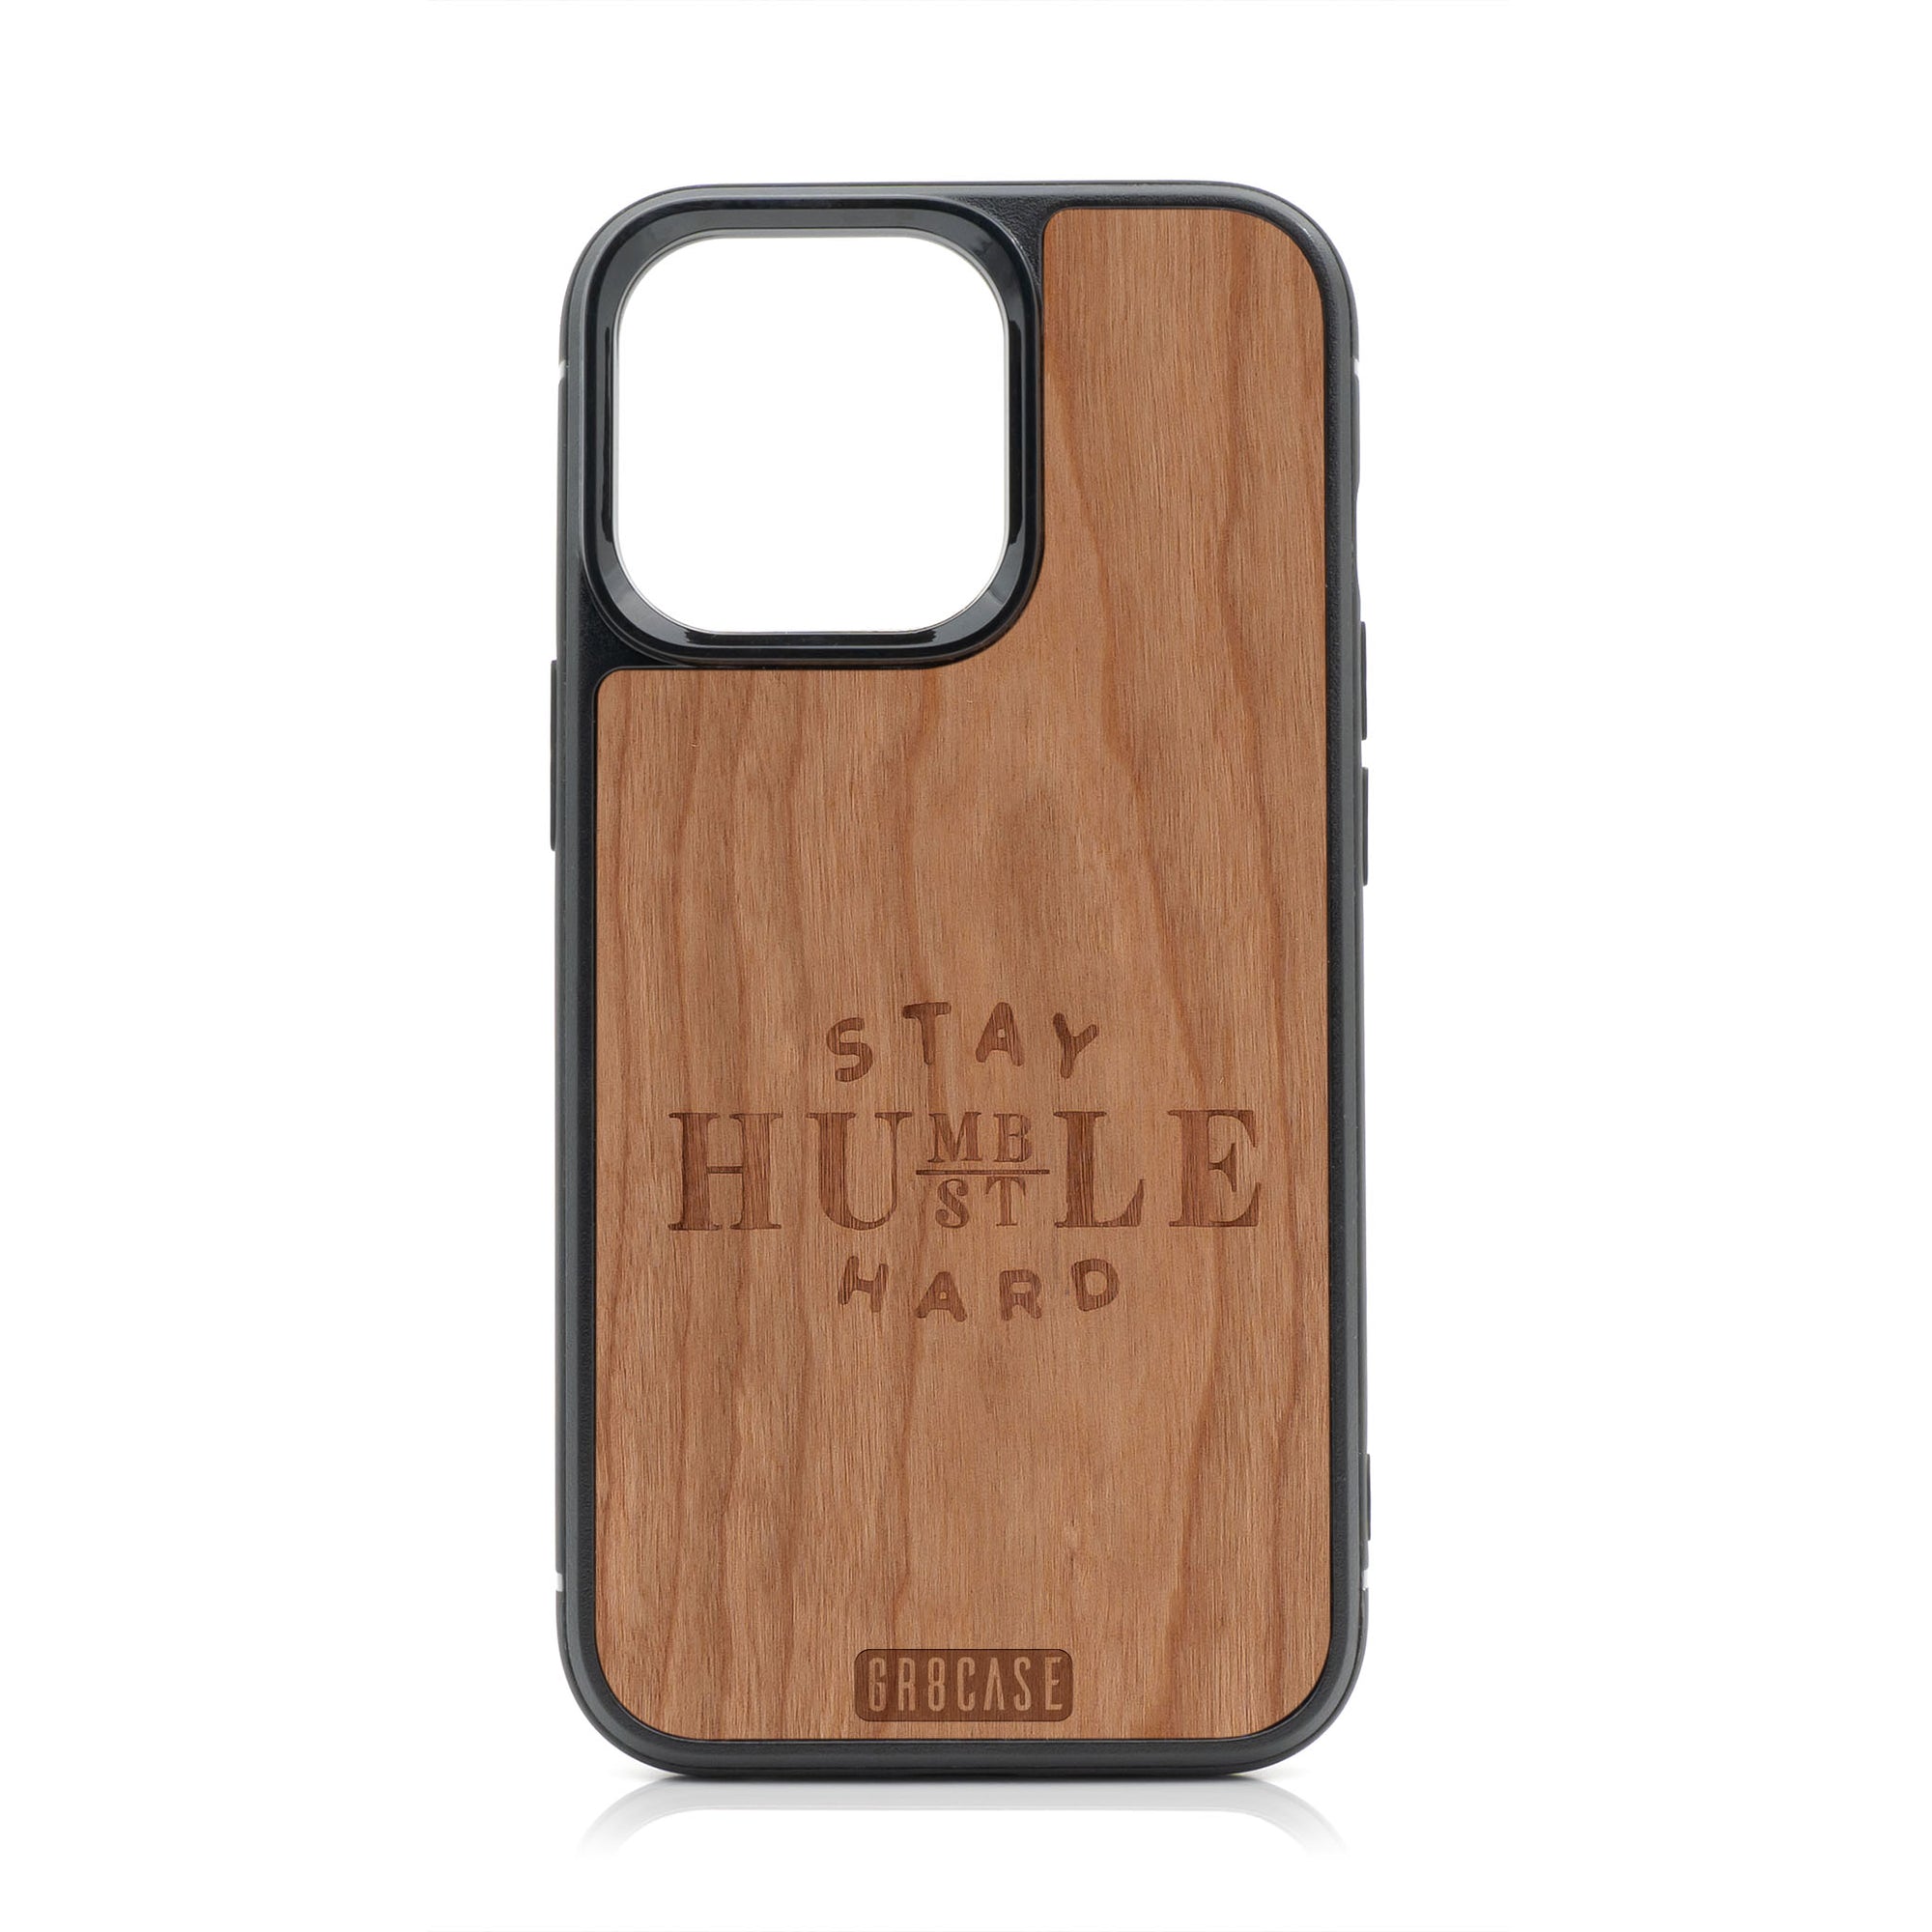 Stay Humble Hustle Hard Design Wood Case For iPhone 13 Pro